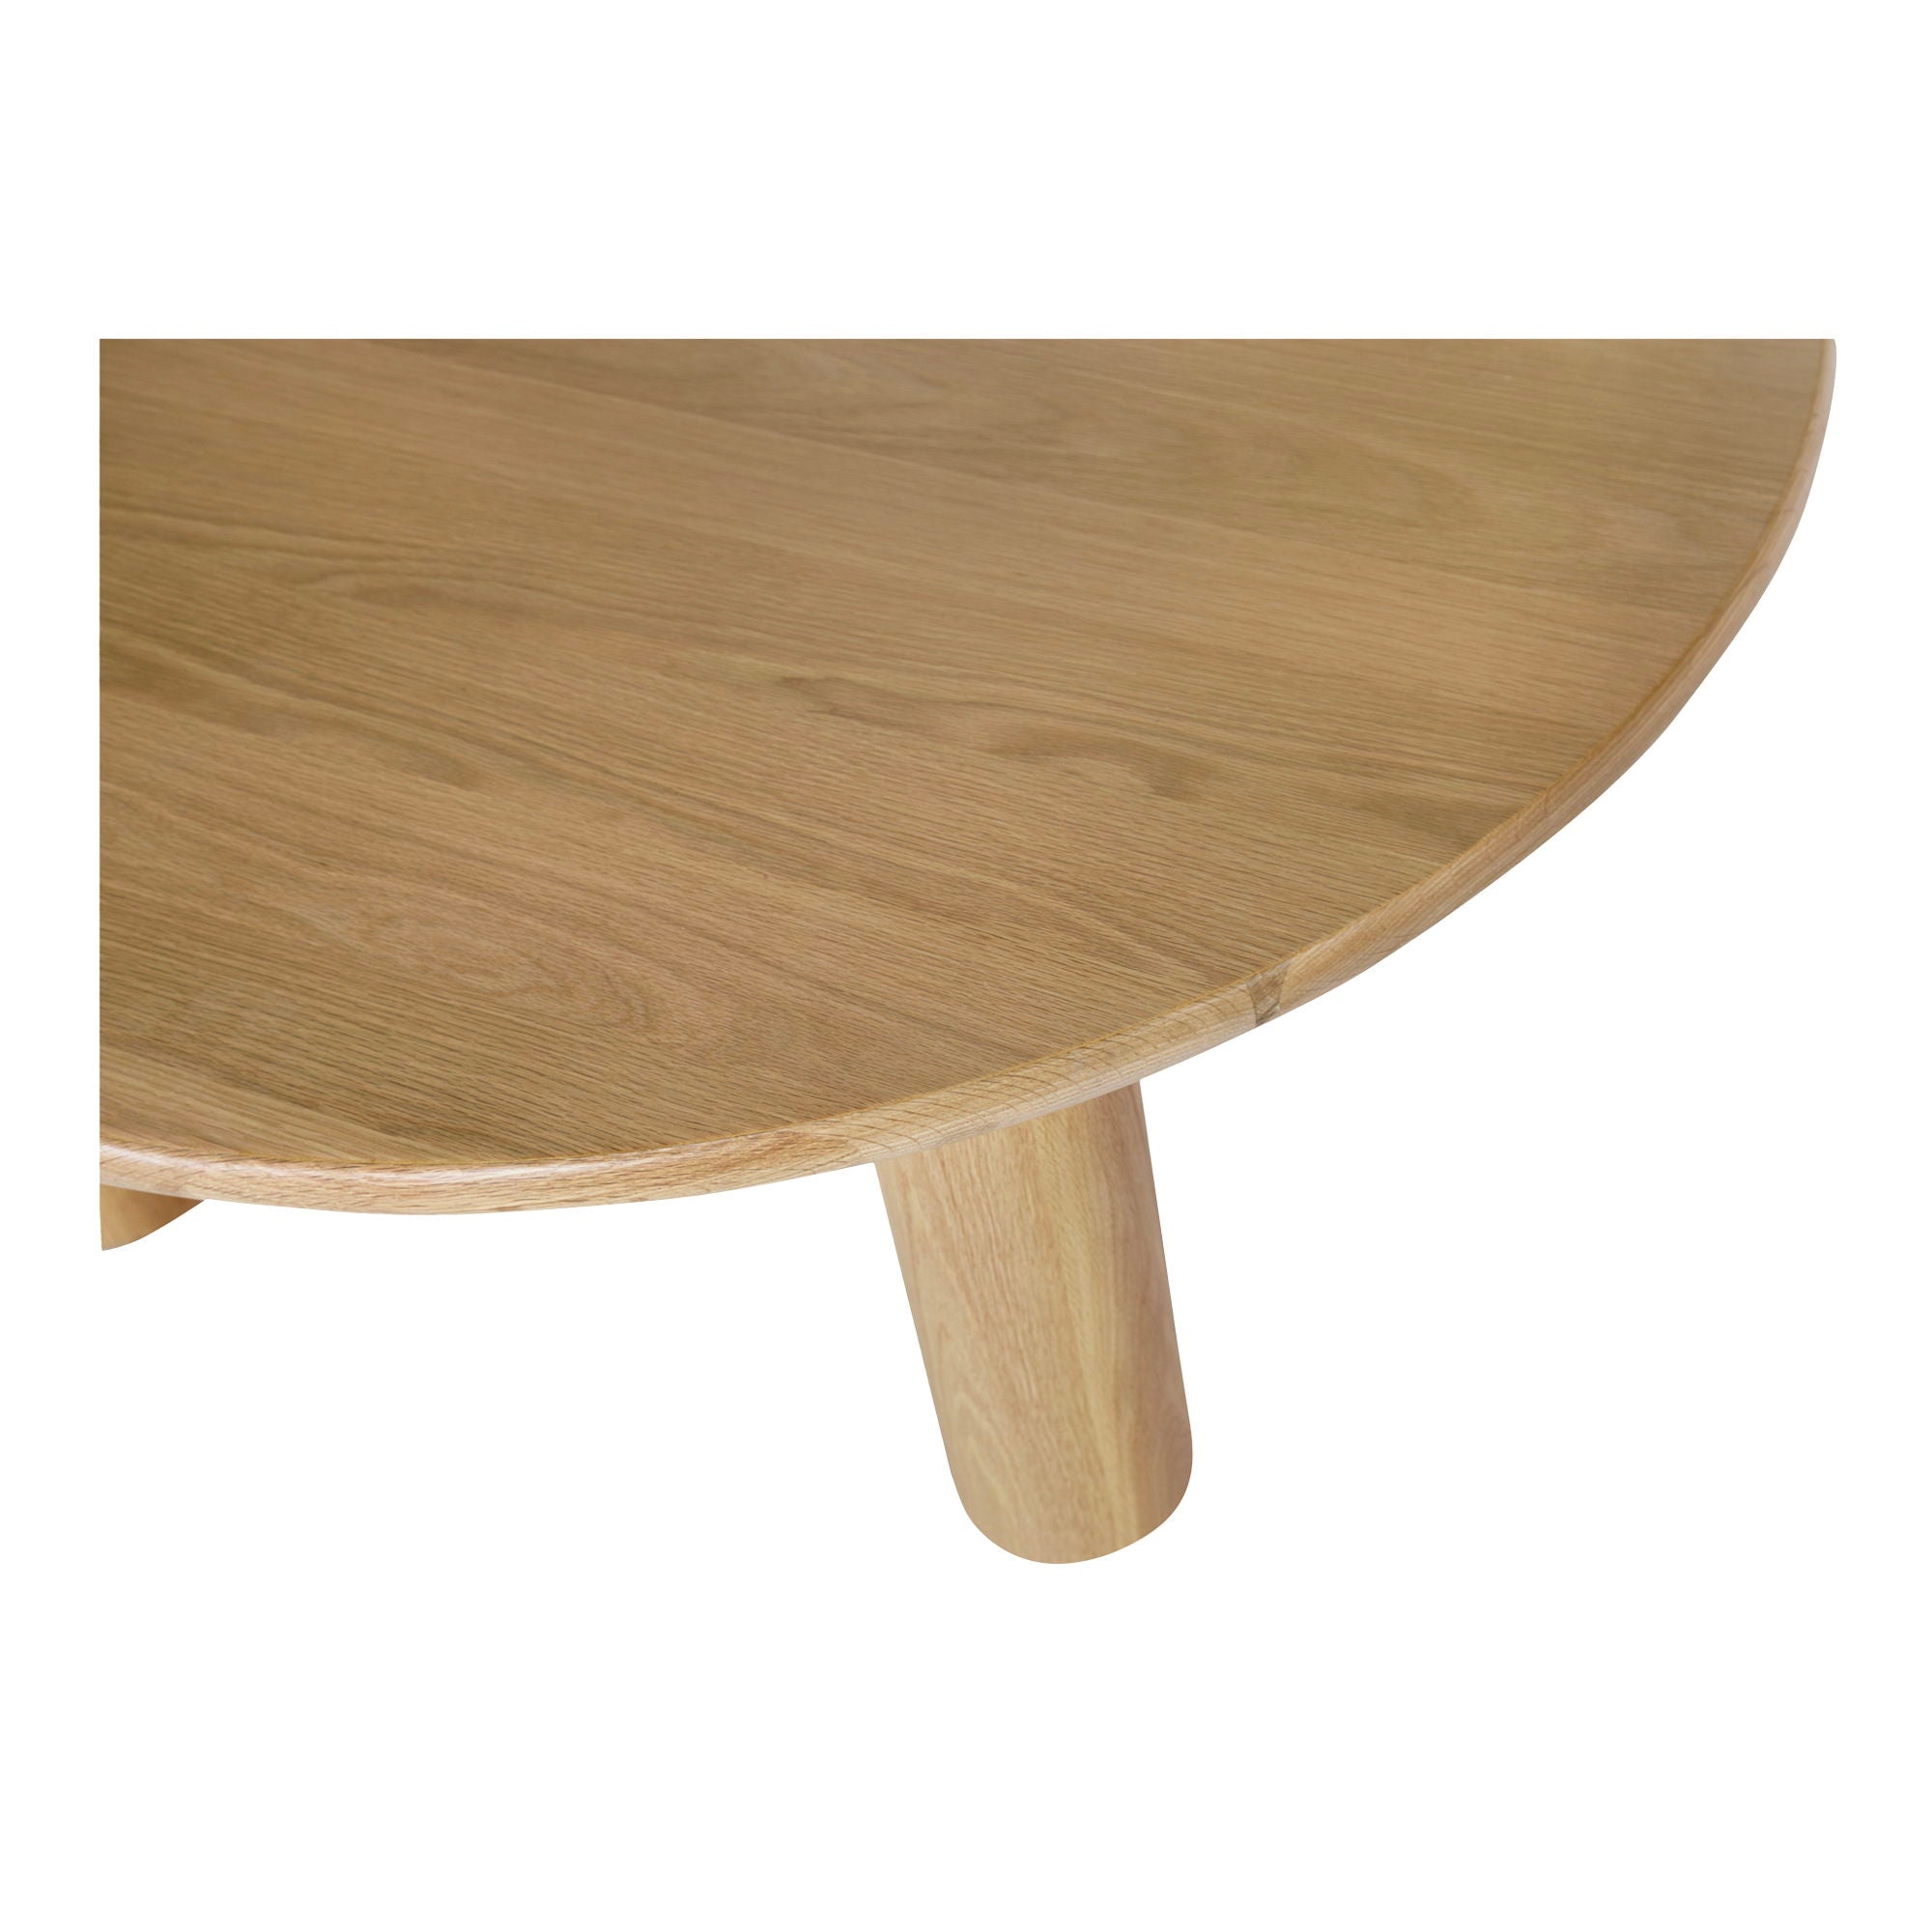 Milo - Round Dining Table - Natural Solid Oak